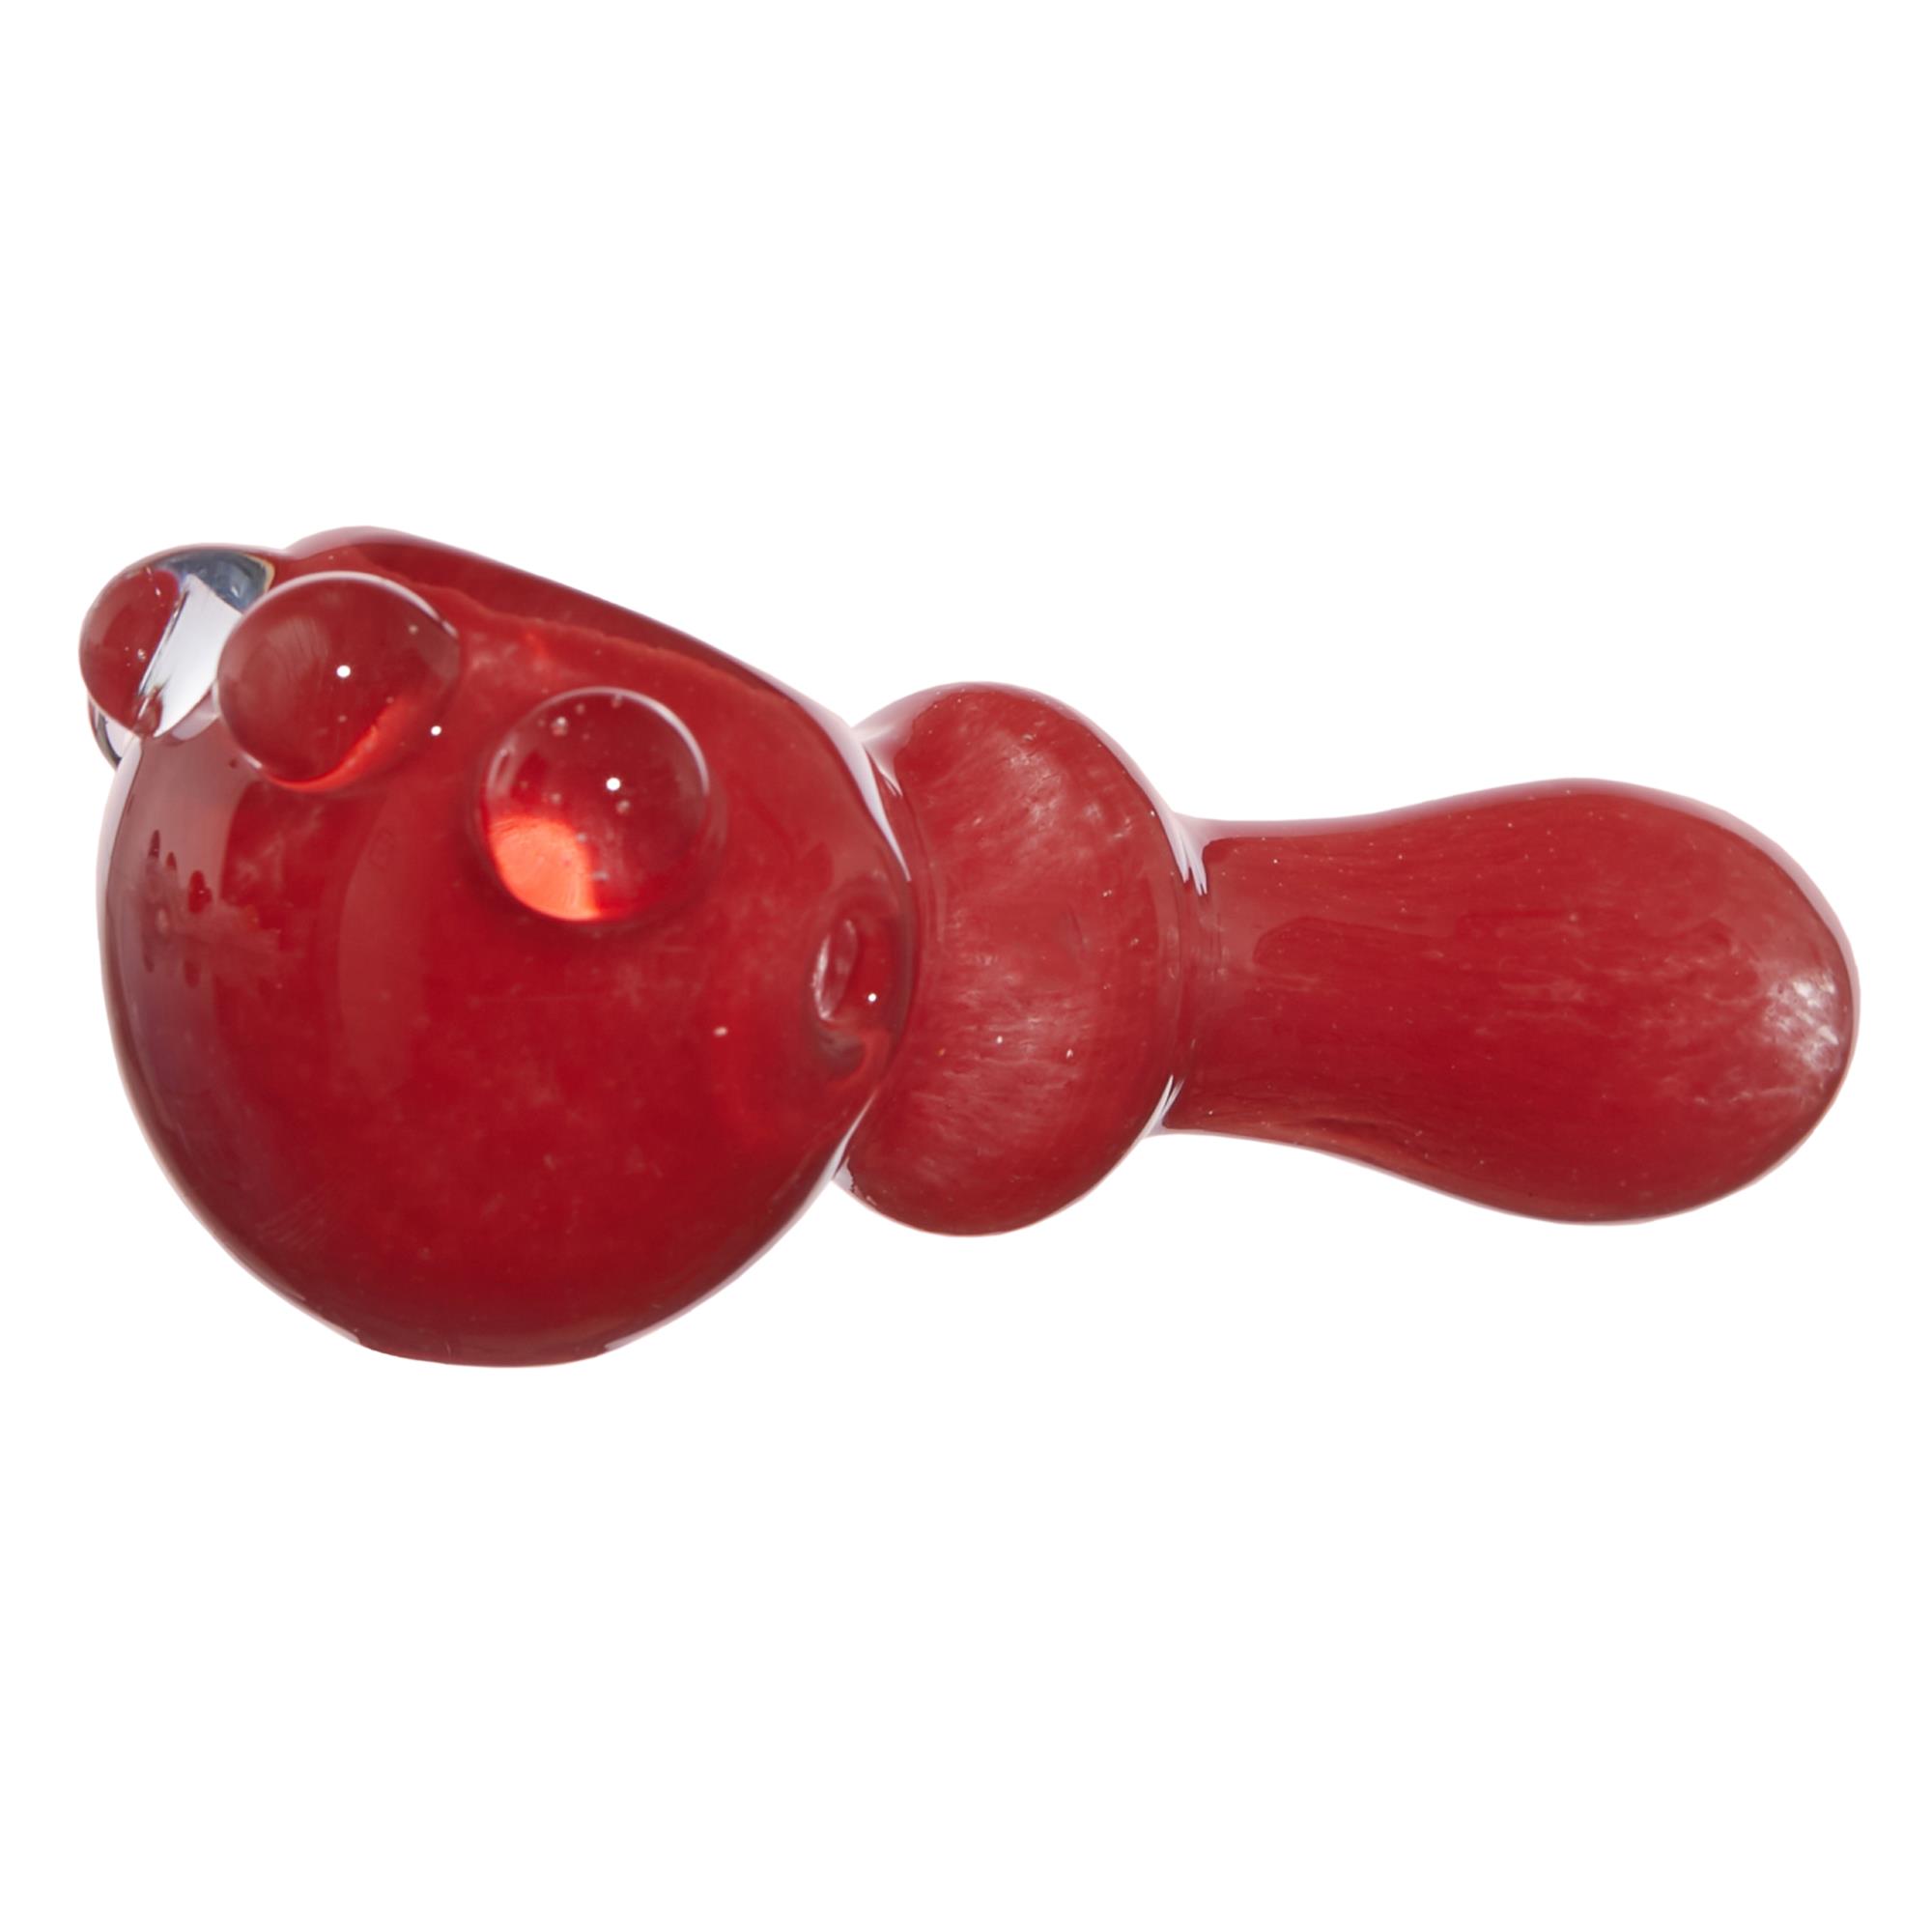 ALLEY CAT SPOON PIPE